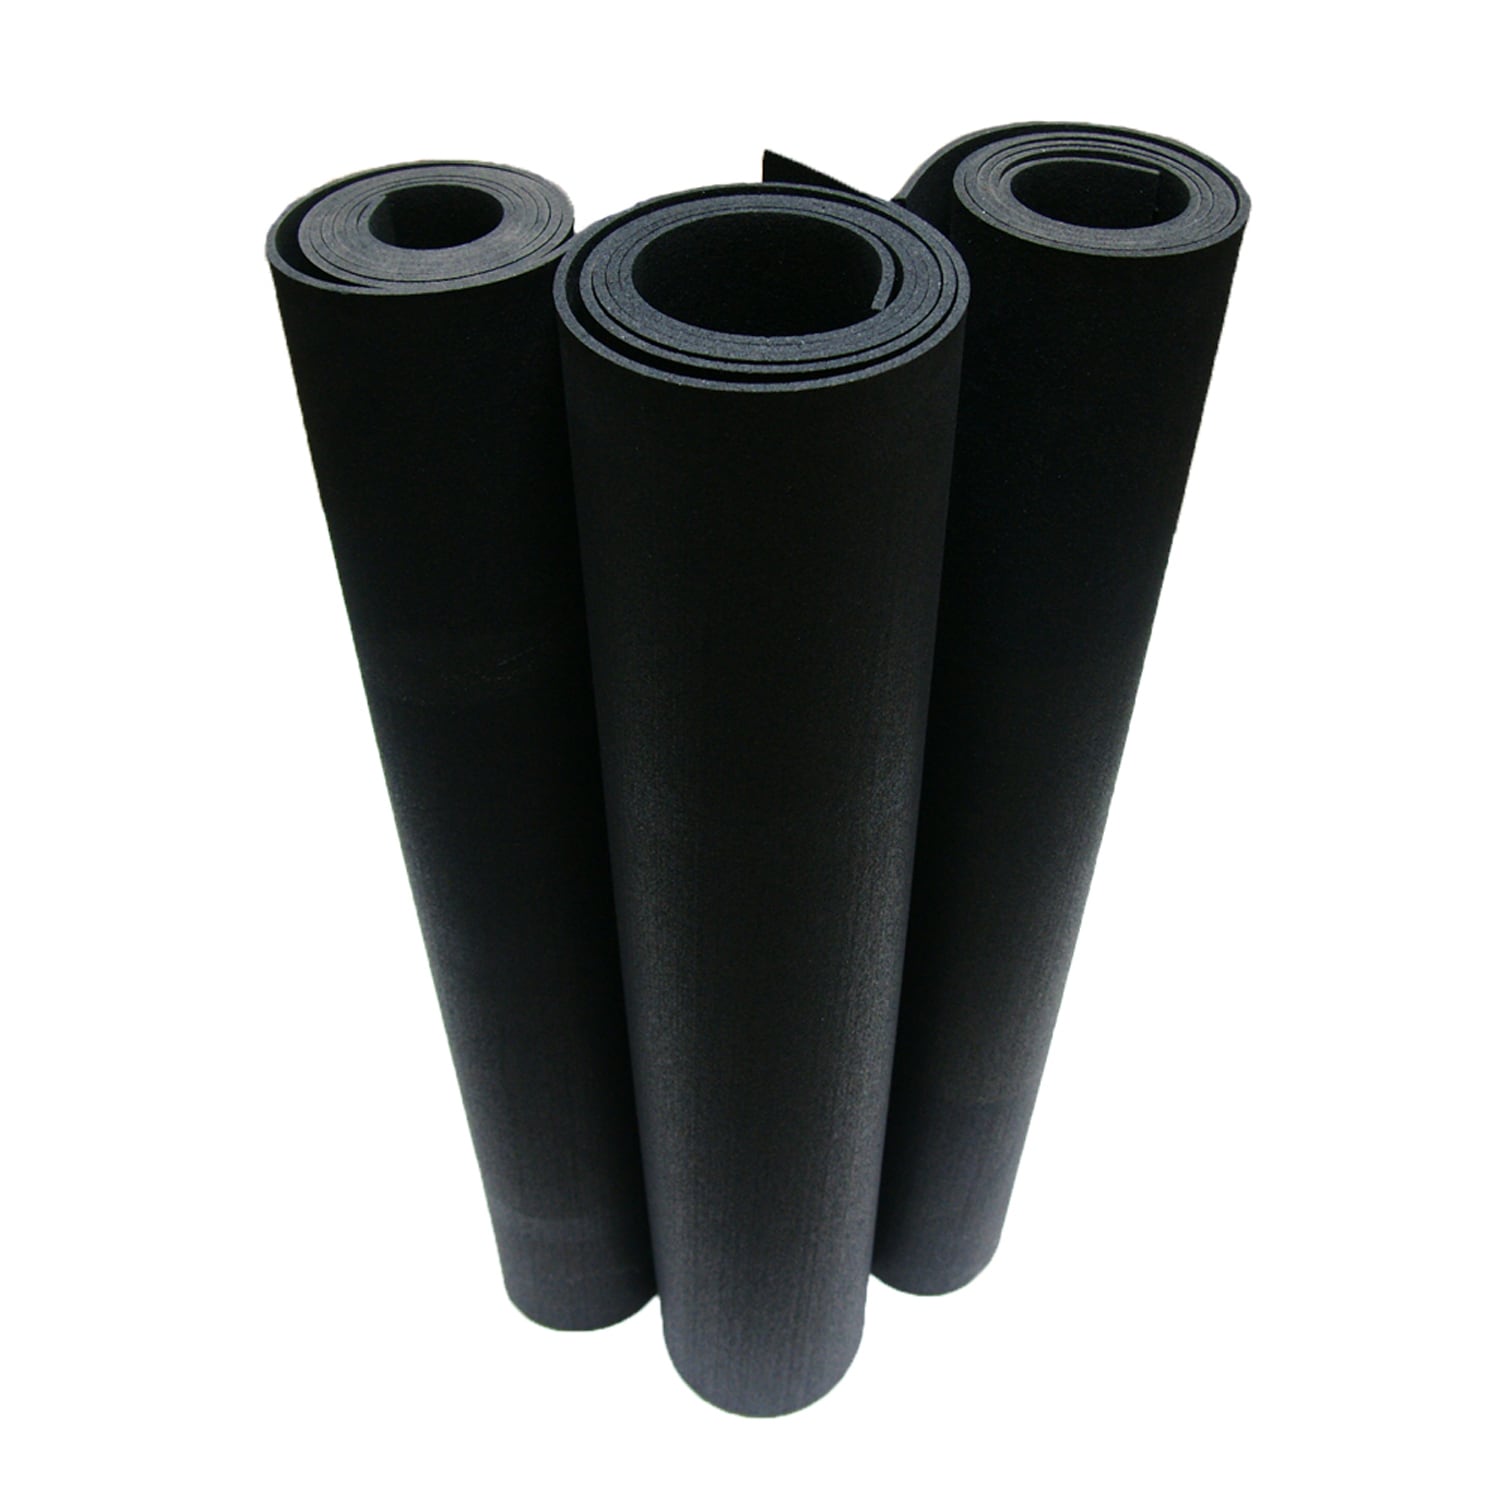 Shop for Rubber Mat Small Hole Rubber Mat Commercial Rubber Matting  57×33.5×0.31 at Wholesale Price on